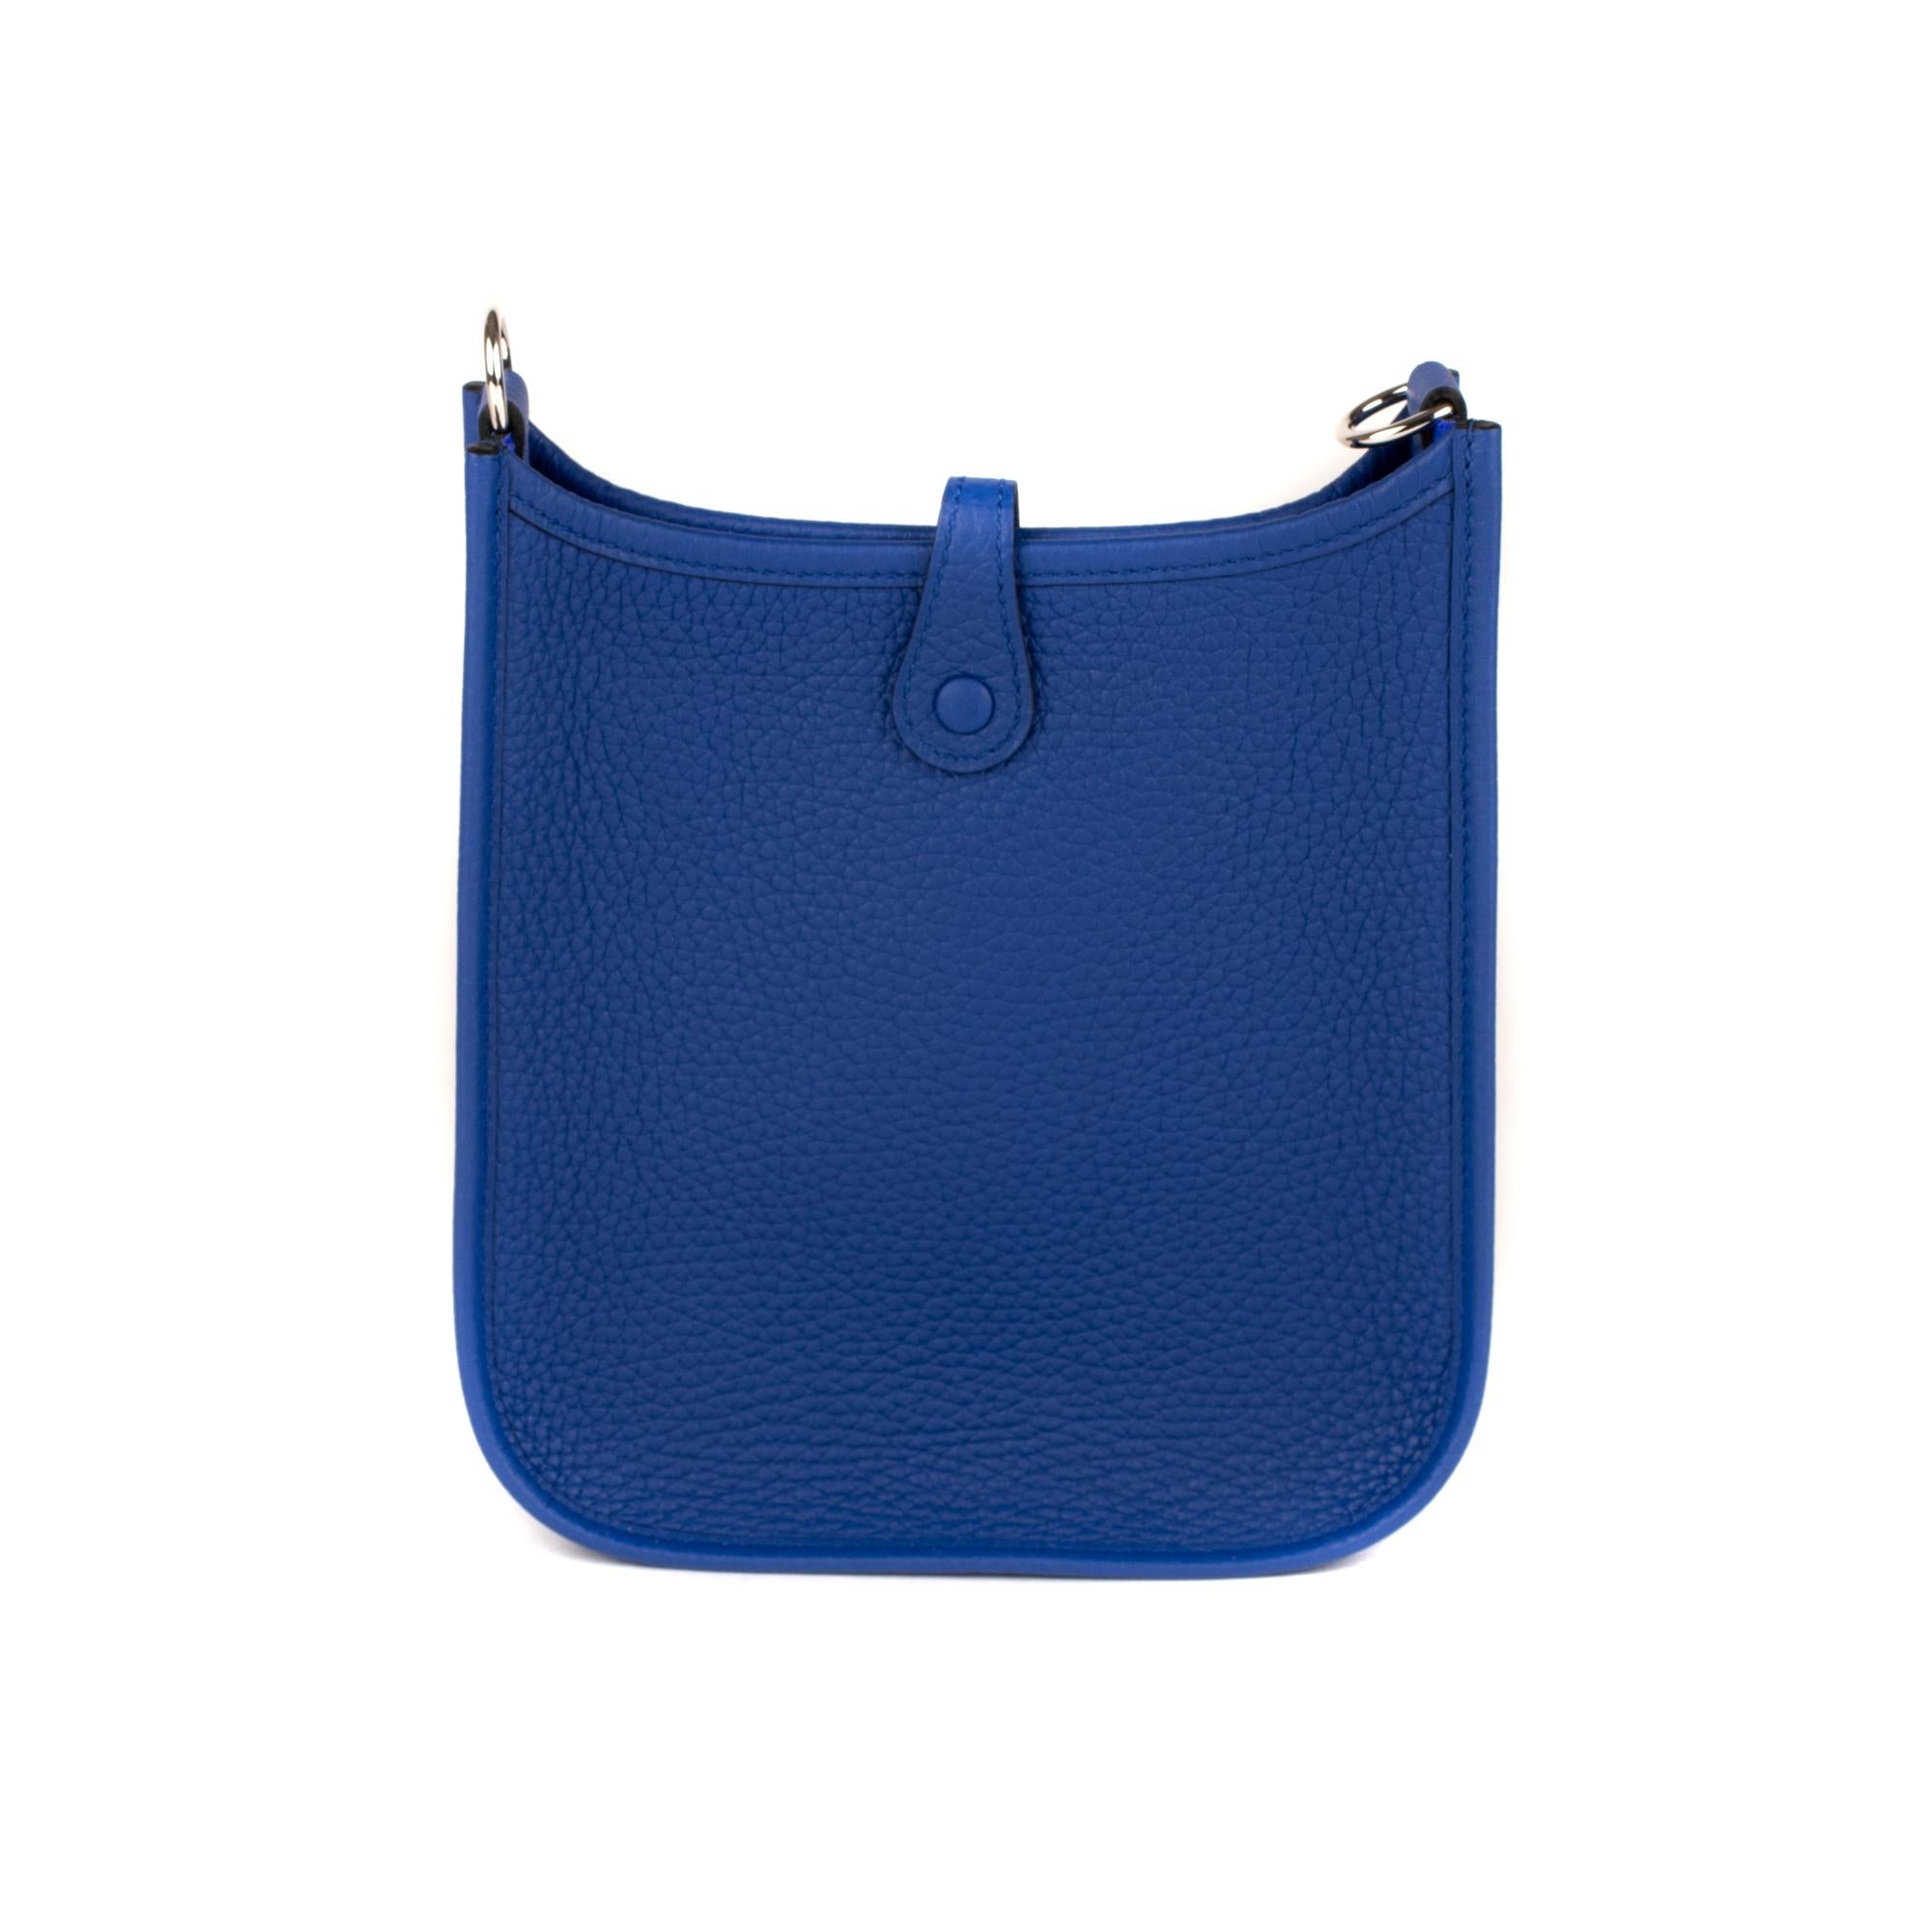 Brand: Hermès
 Type: Evelyne 16 
Color: Electric Blue
 Size: 16 * 18 
Outer material: Leather 
Inner material: Suede 
Hardware: Silver
 Color of the shoulder strap: Black 
Length of the strap: 113,5cm 
 condition: with plastics. never